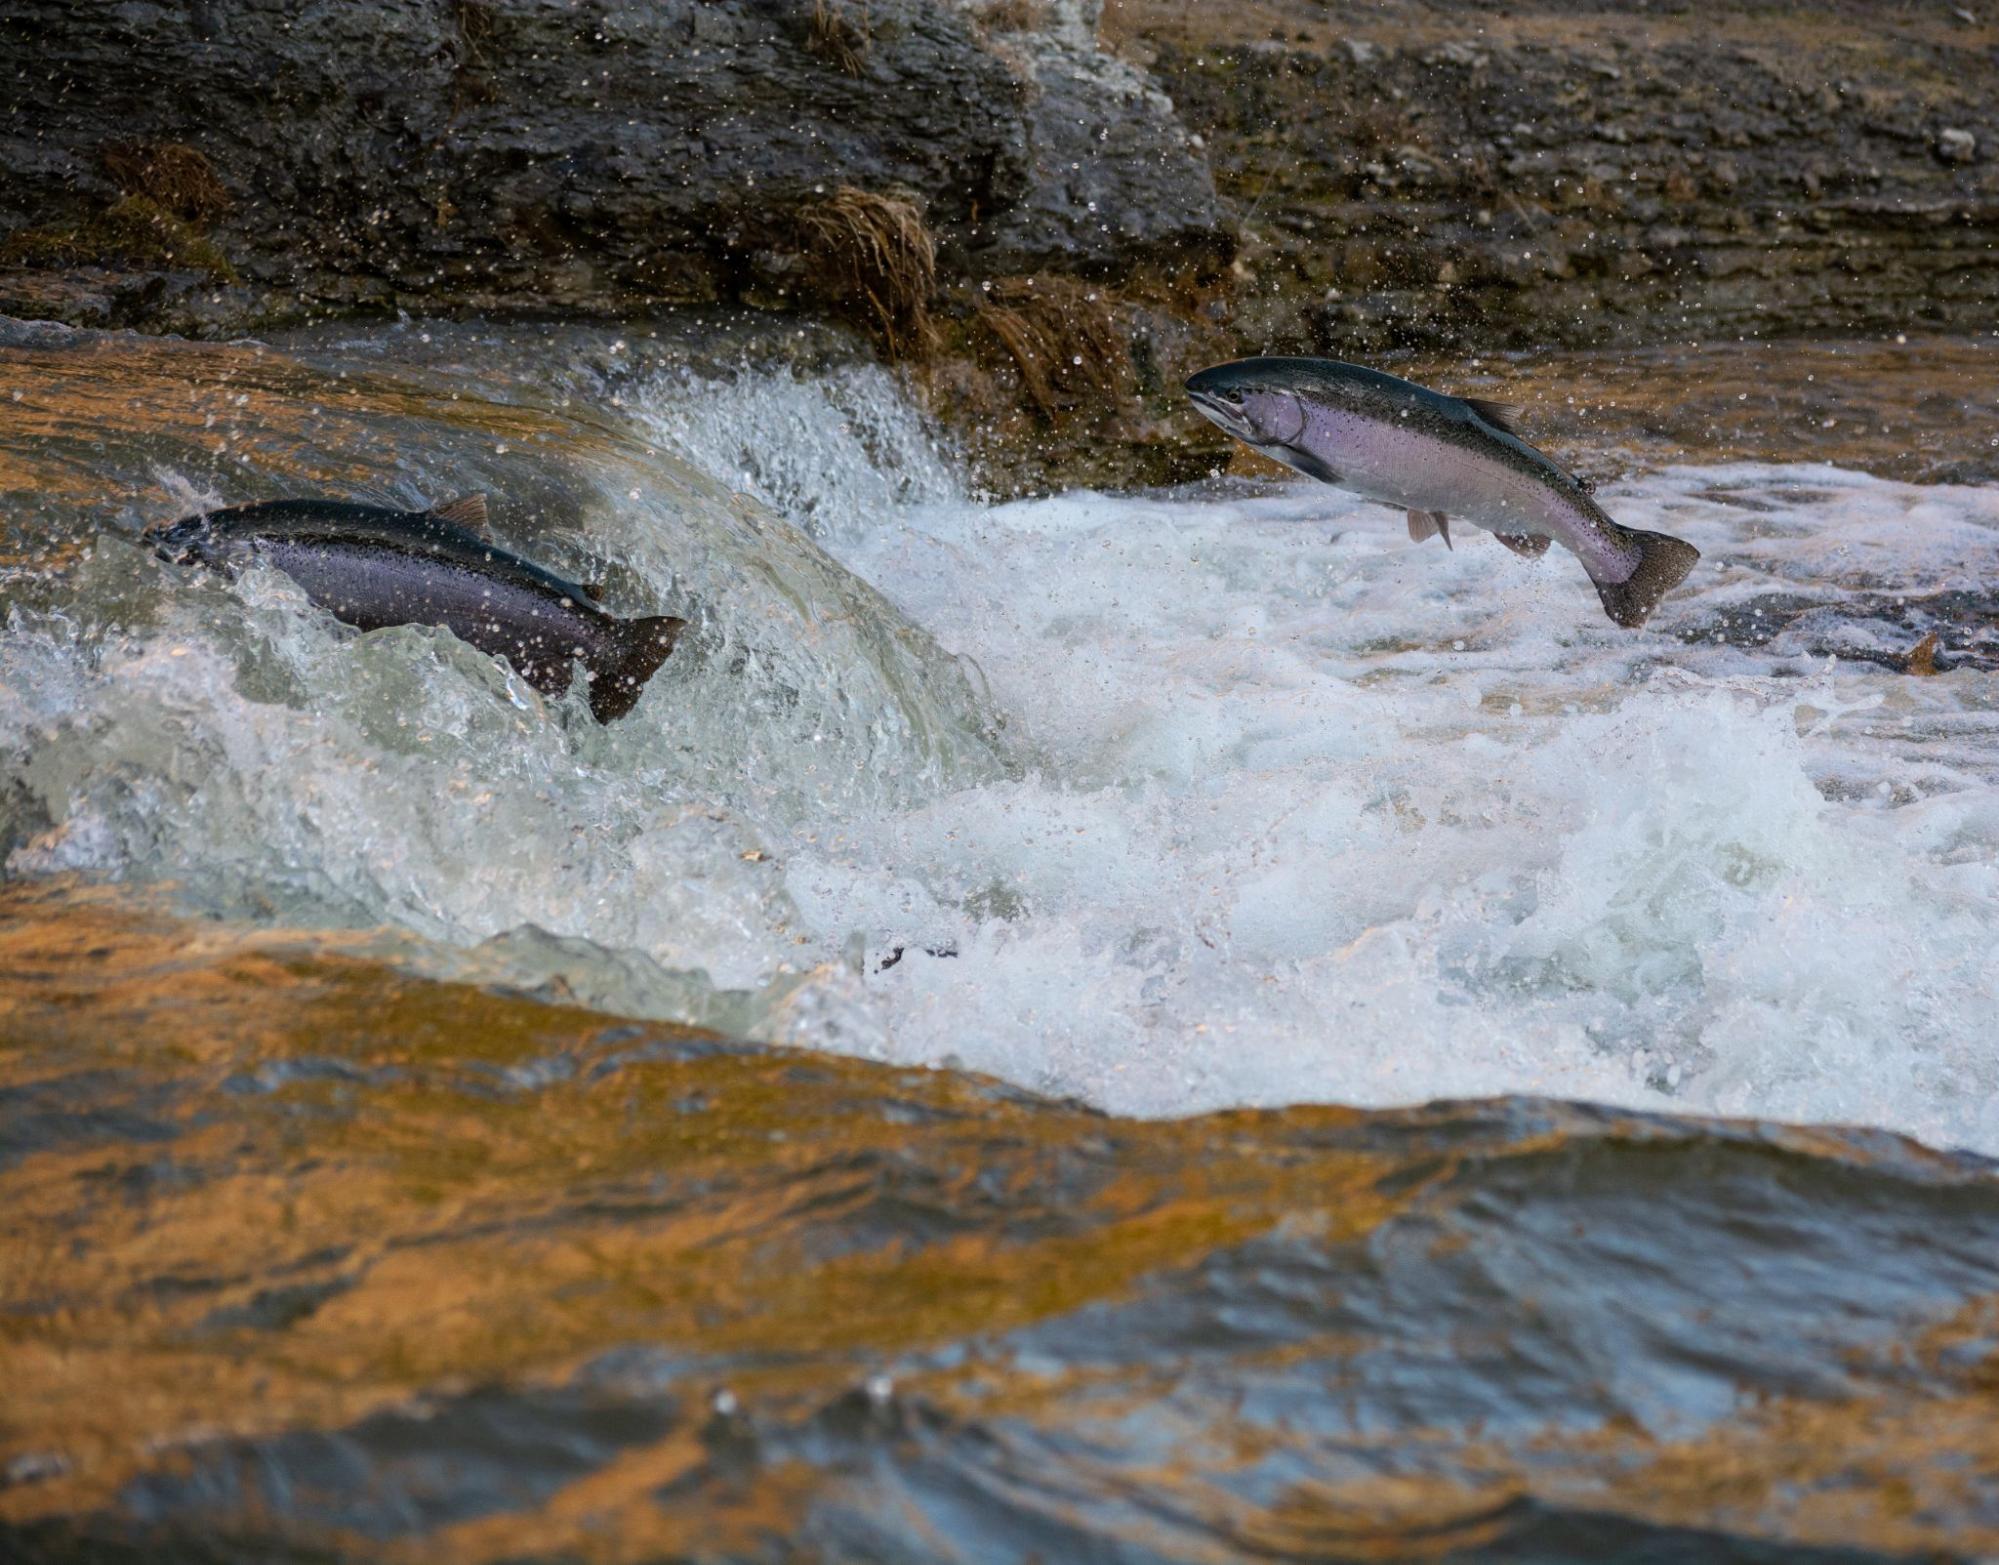 Two fish leaping out of the water, swimming upstream against the rapids